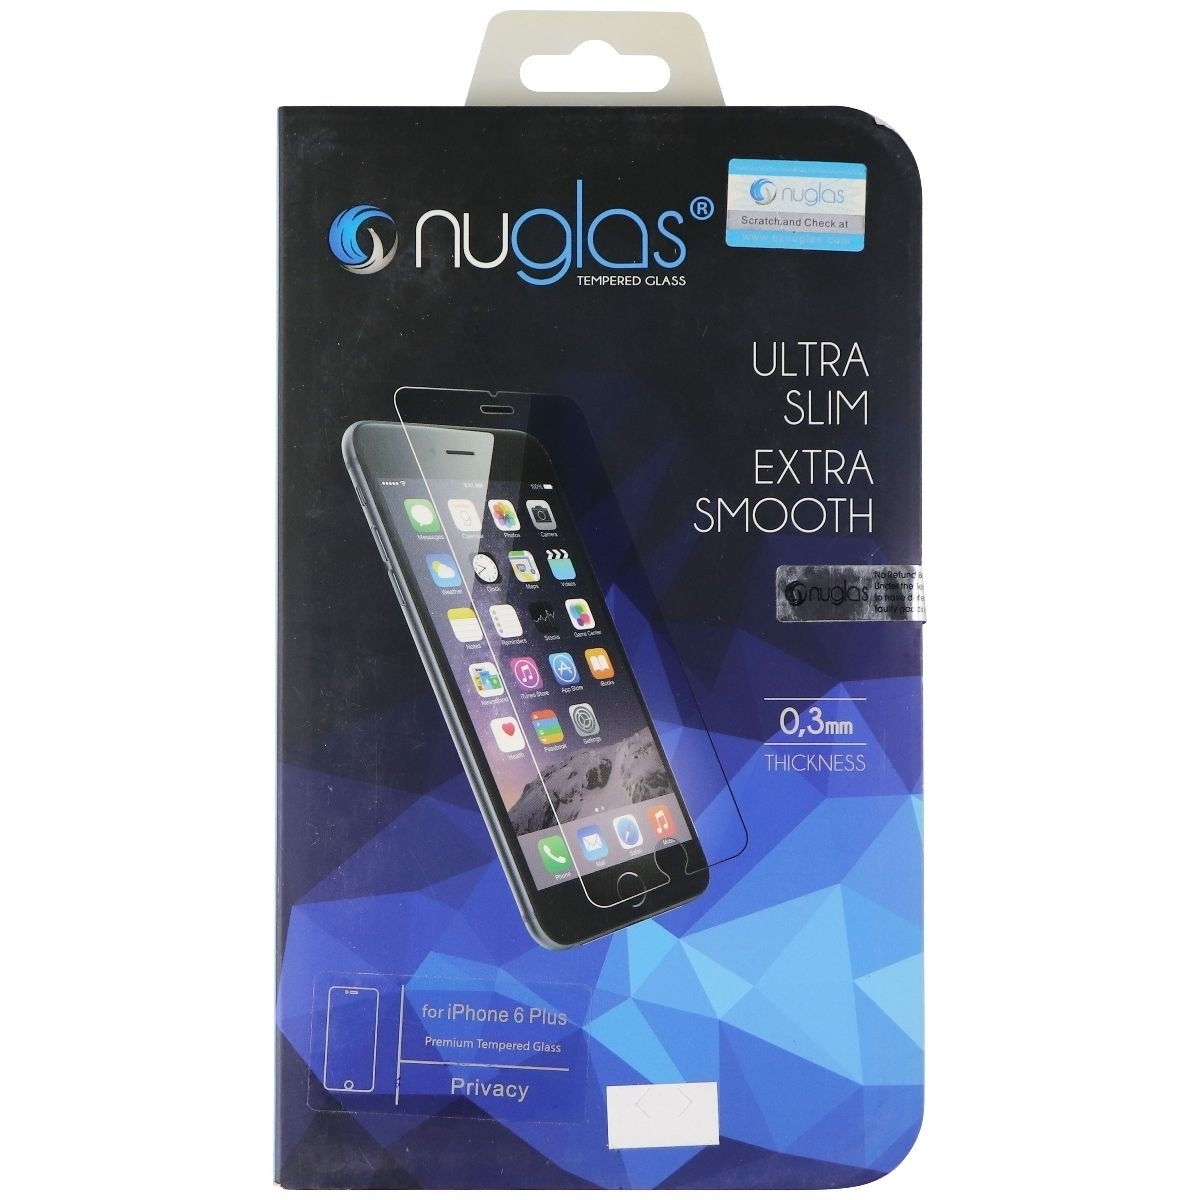 Nuglas Tempered Glass Screen Protector For IPhone 6+ (Plus) - Privacy Tinted